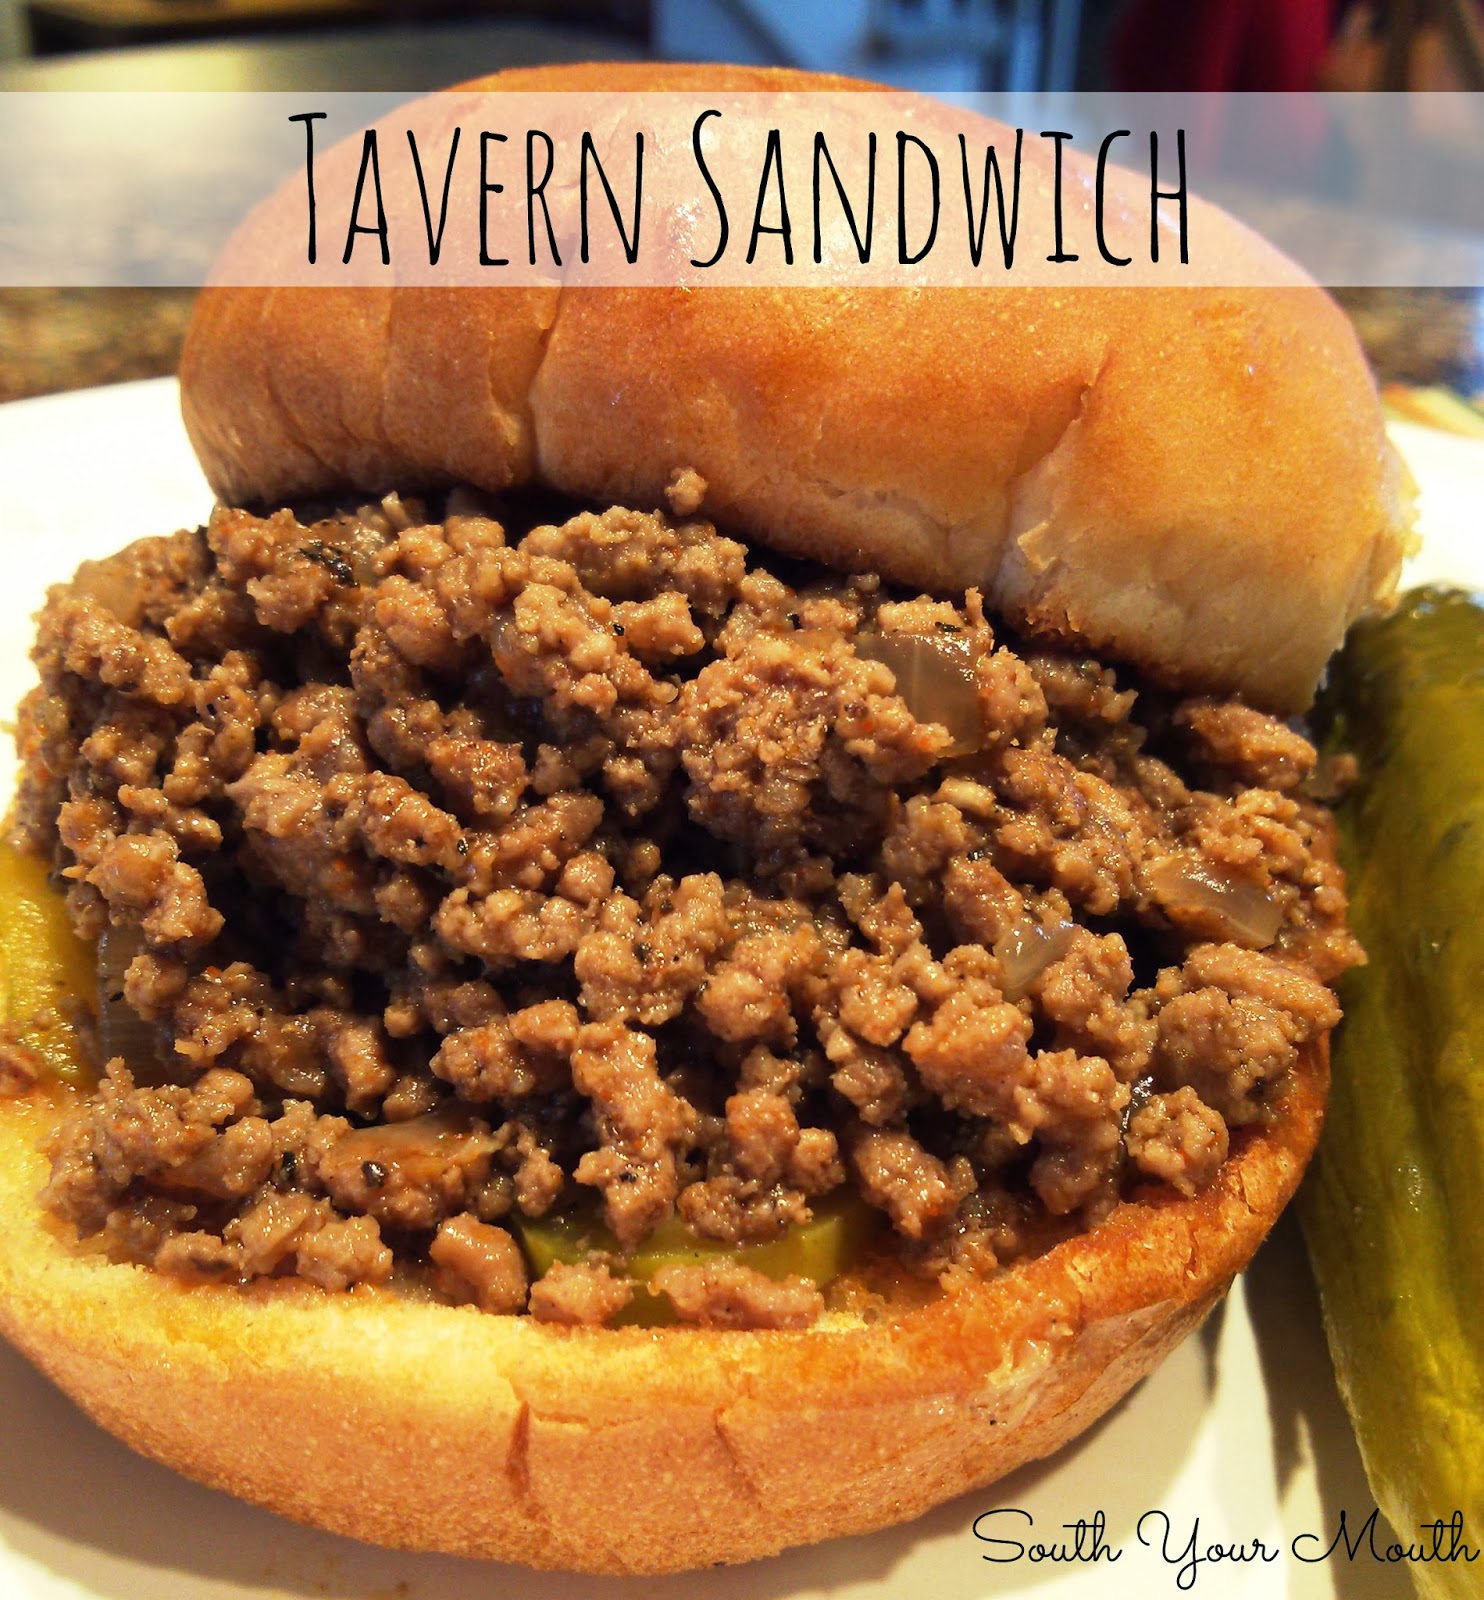 South Your Mouth: Tavern Sandwich - or Loose Meat Sandwich